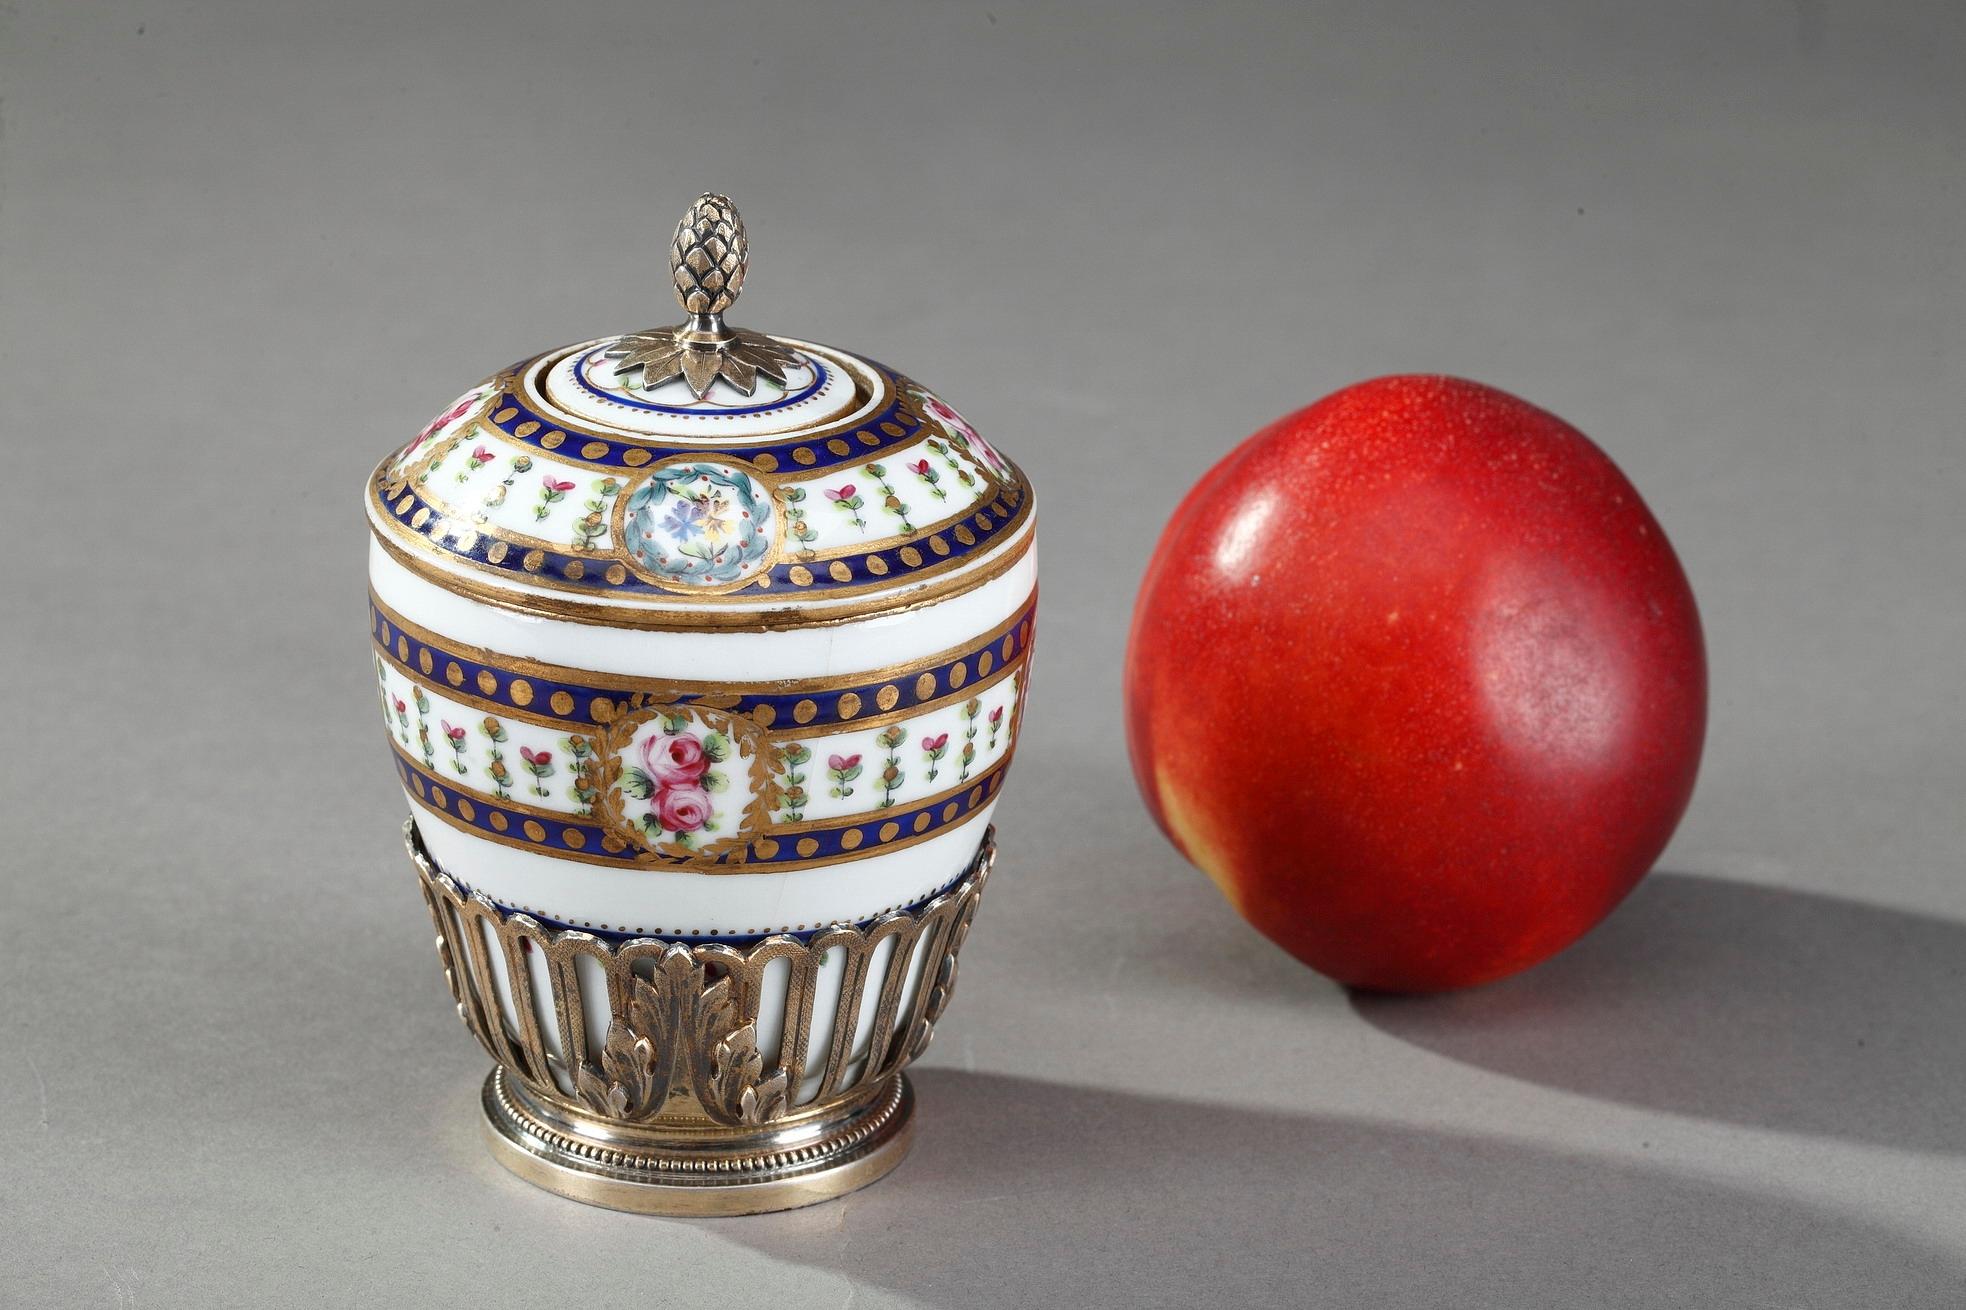 Small inkwell crafted in porcelain, the paunch and lid decorated with a frieze of polychromatic floral motives highlighted with gold. The lid topped by a pine cone finial features a compartment to hold ink. Silver-gilt mounts, finely chiselled with